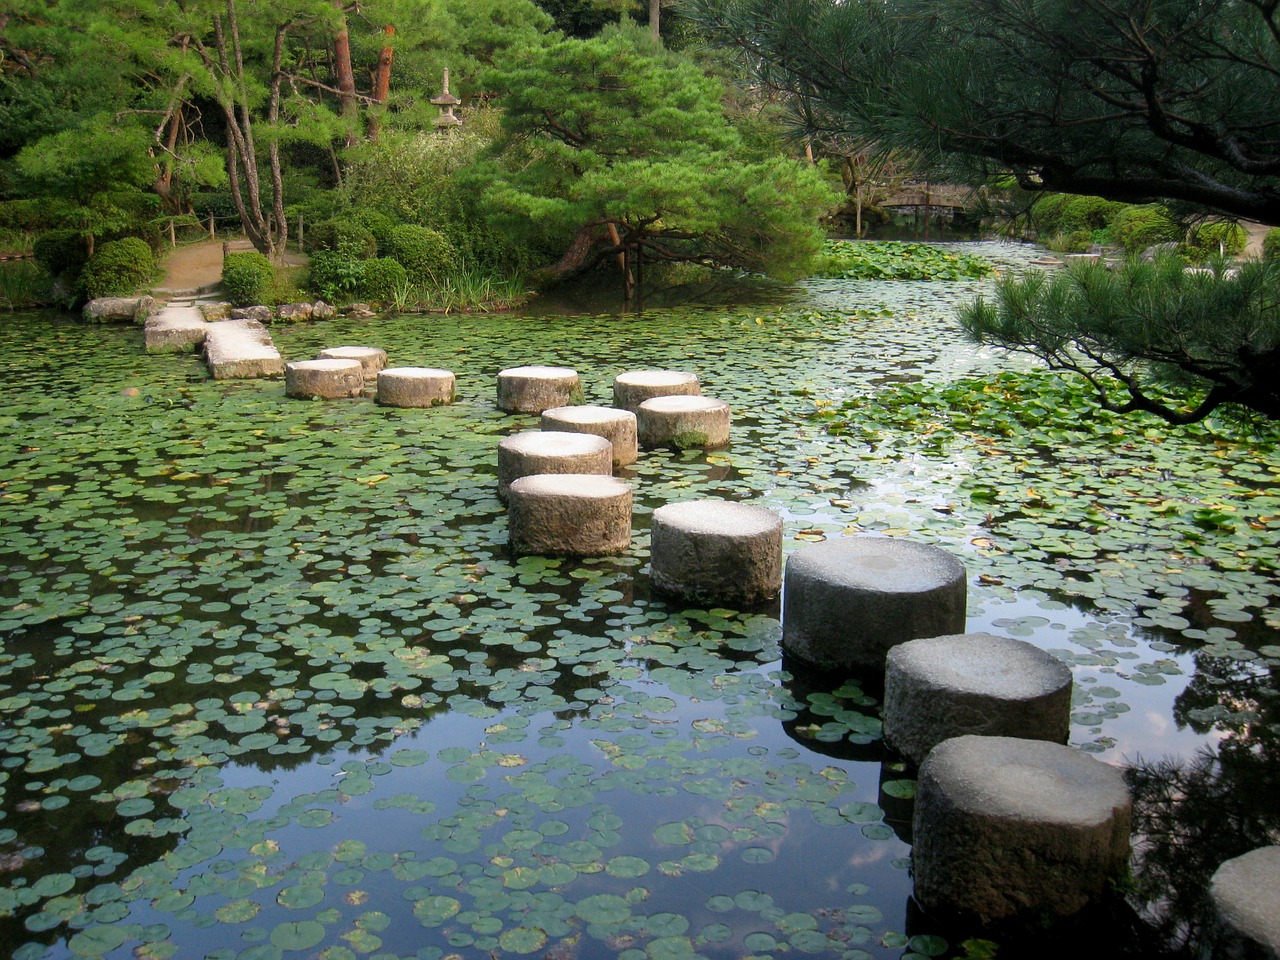 Personal growth. A Japanese garden path of tree stumps in a lake filled with water lily pads.